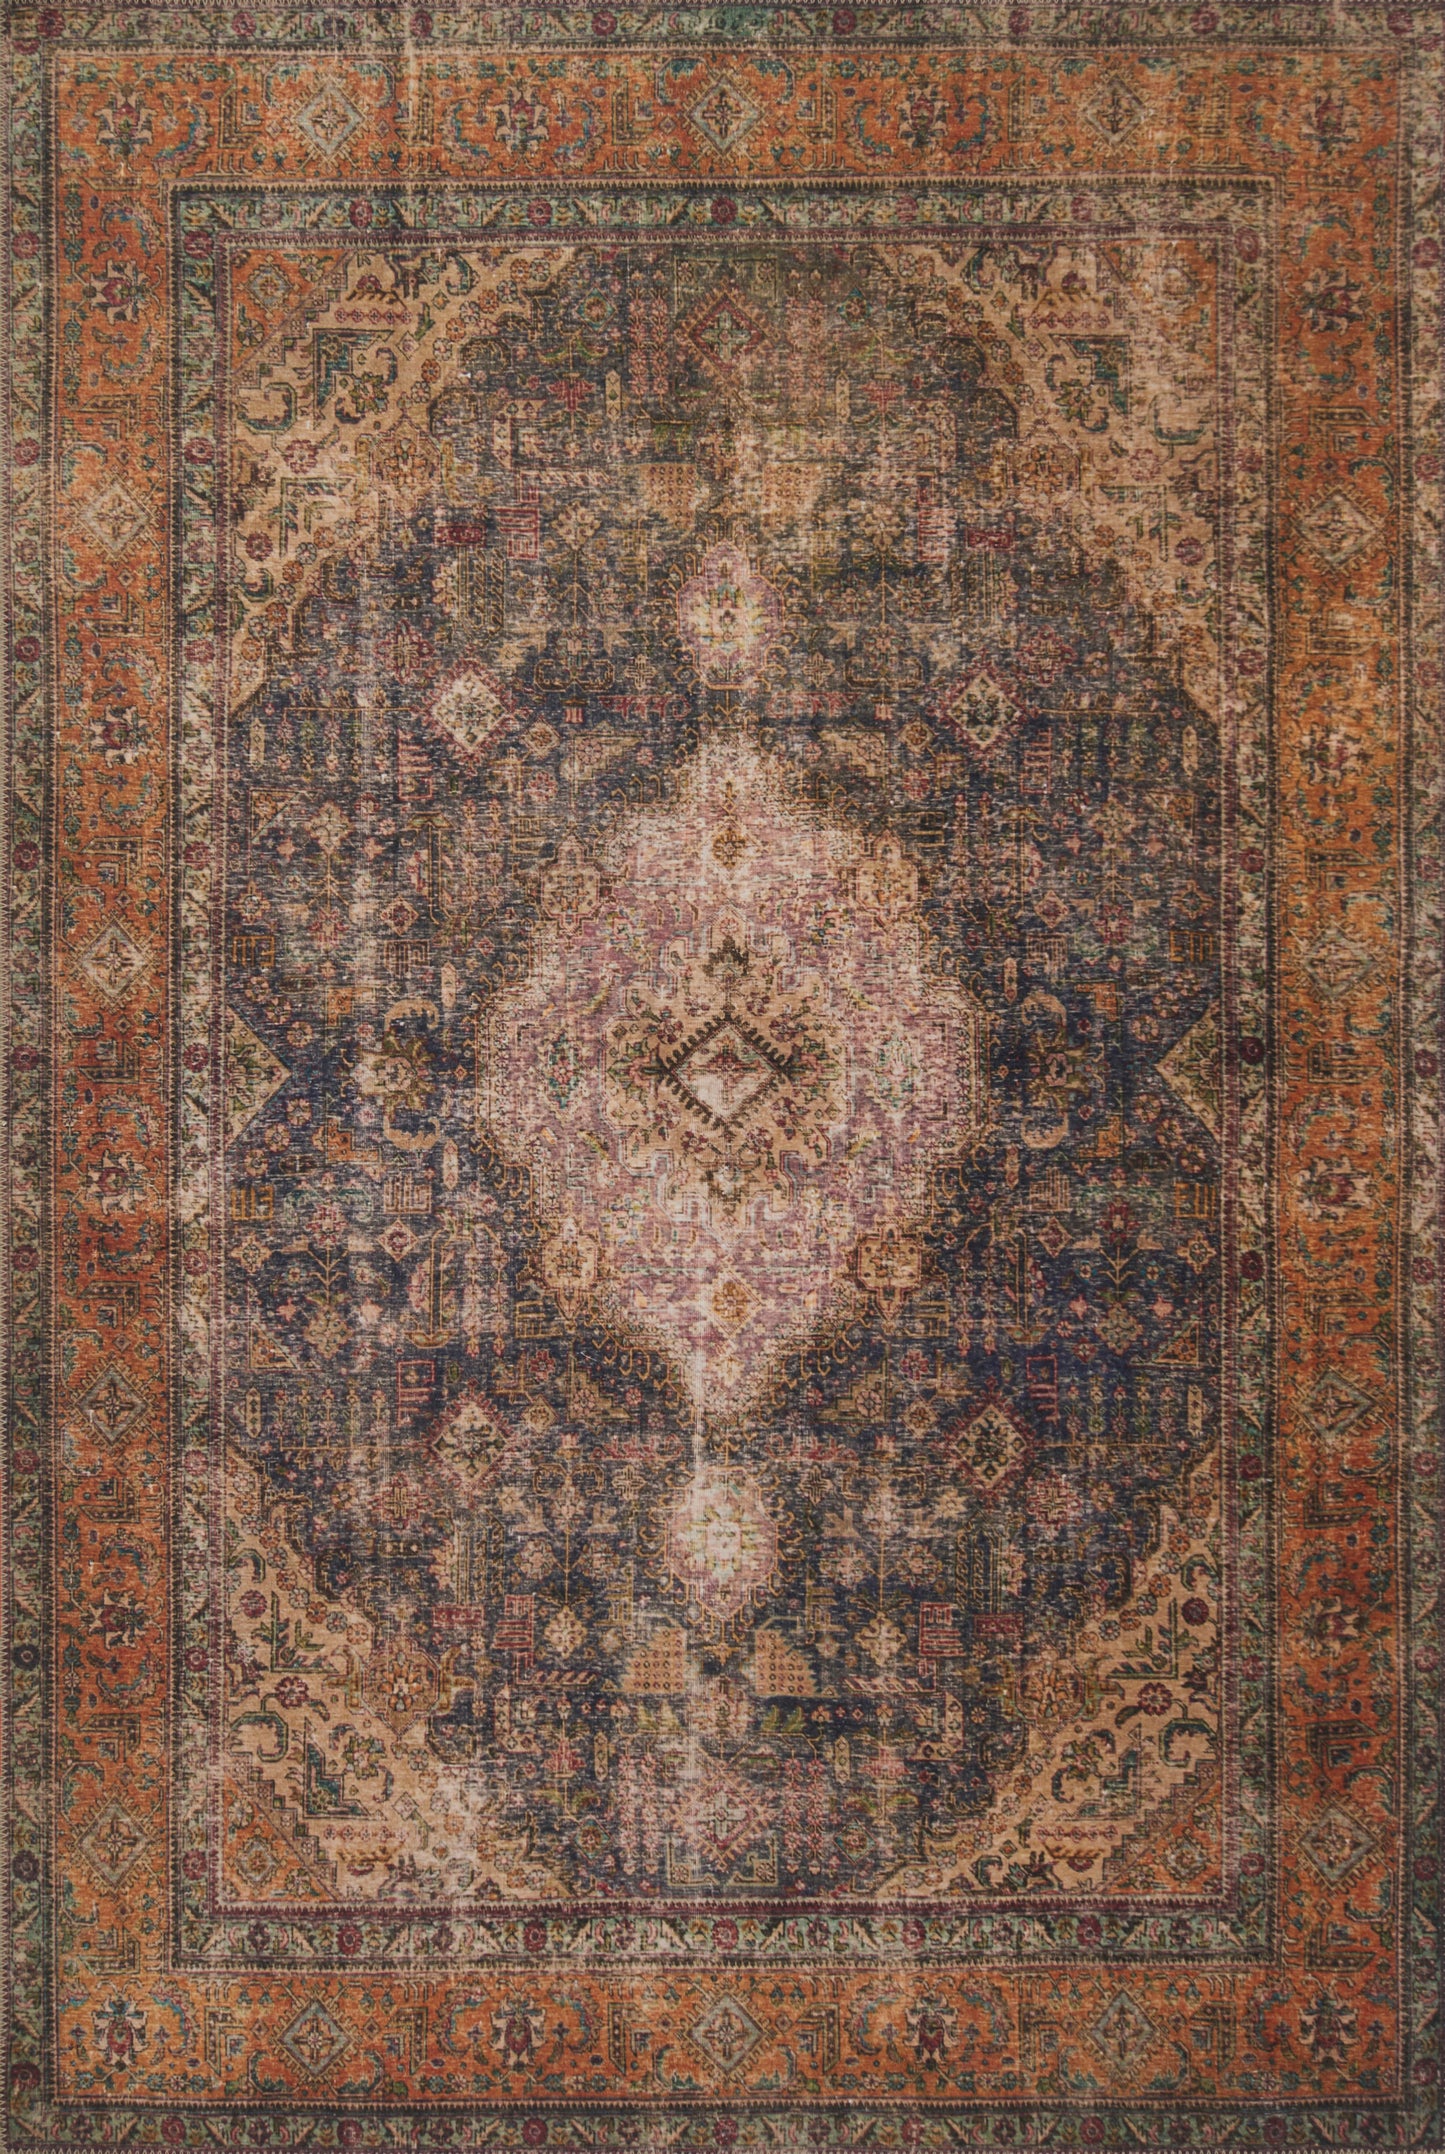 LO-201: Carpet printed on polyester